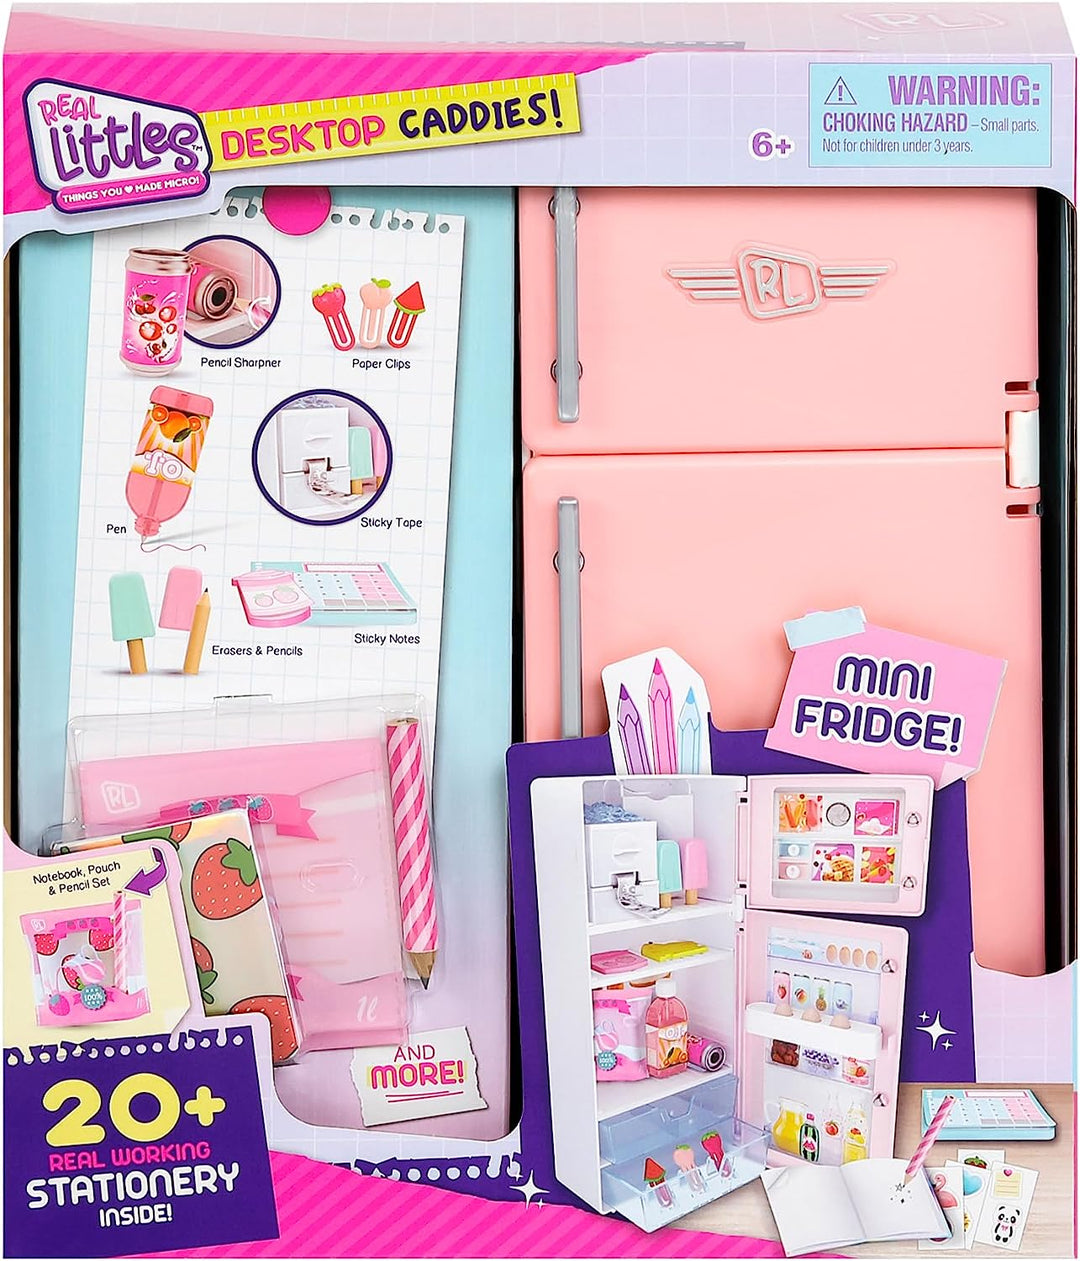 Real Littles Desktop Caddies - Mini Fridge with 20+ real Working Stationery Surprises